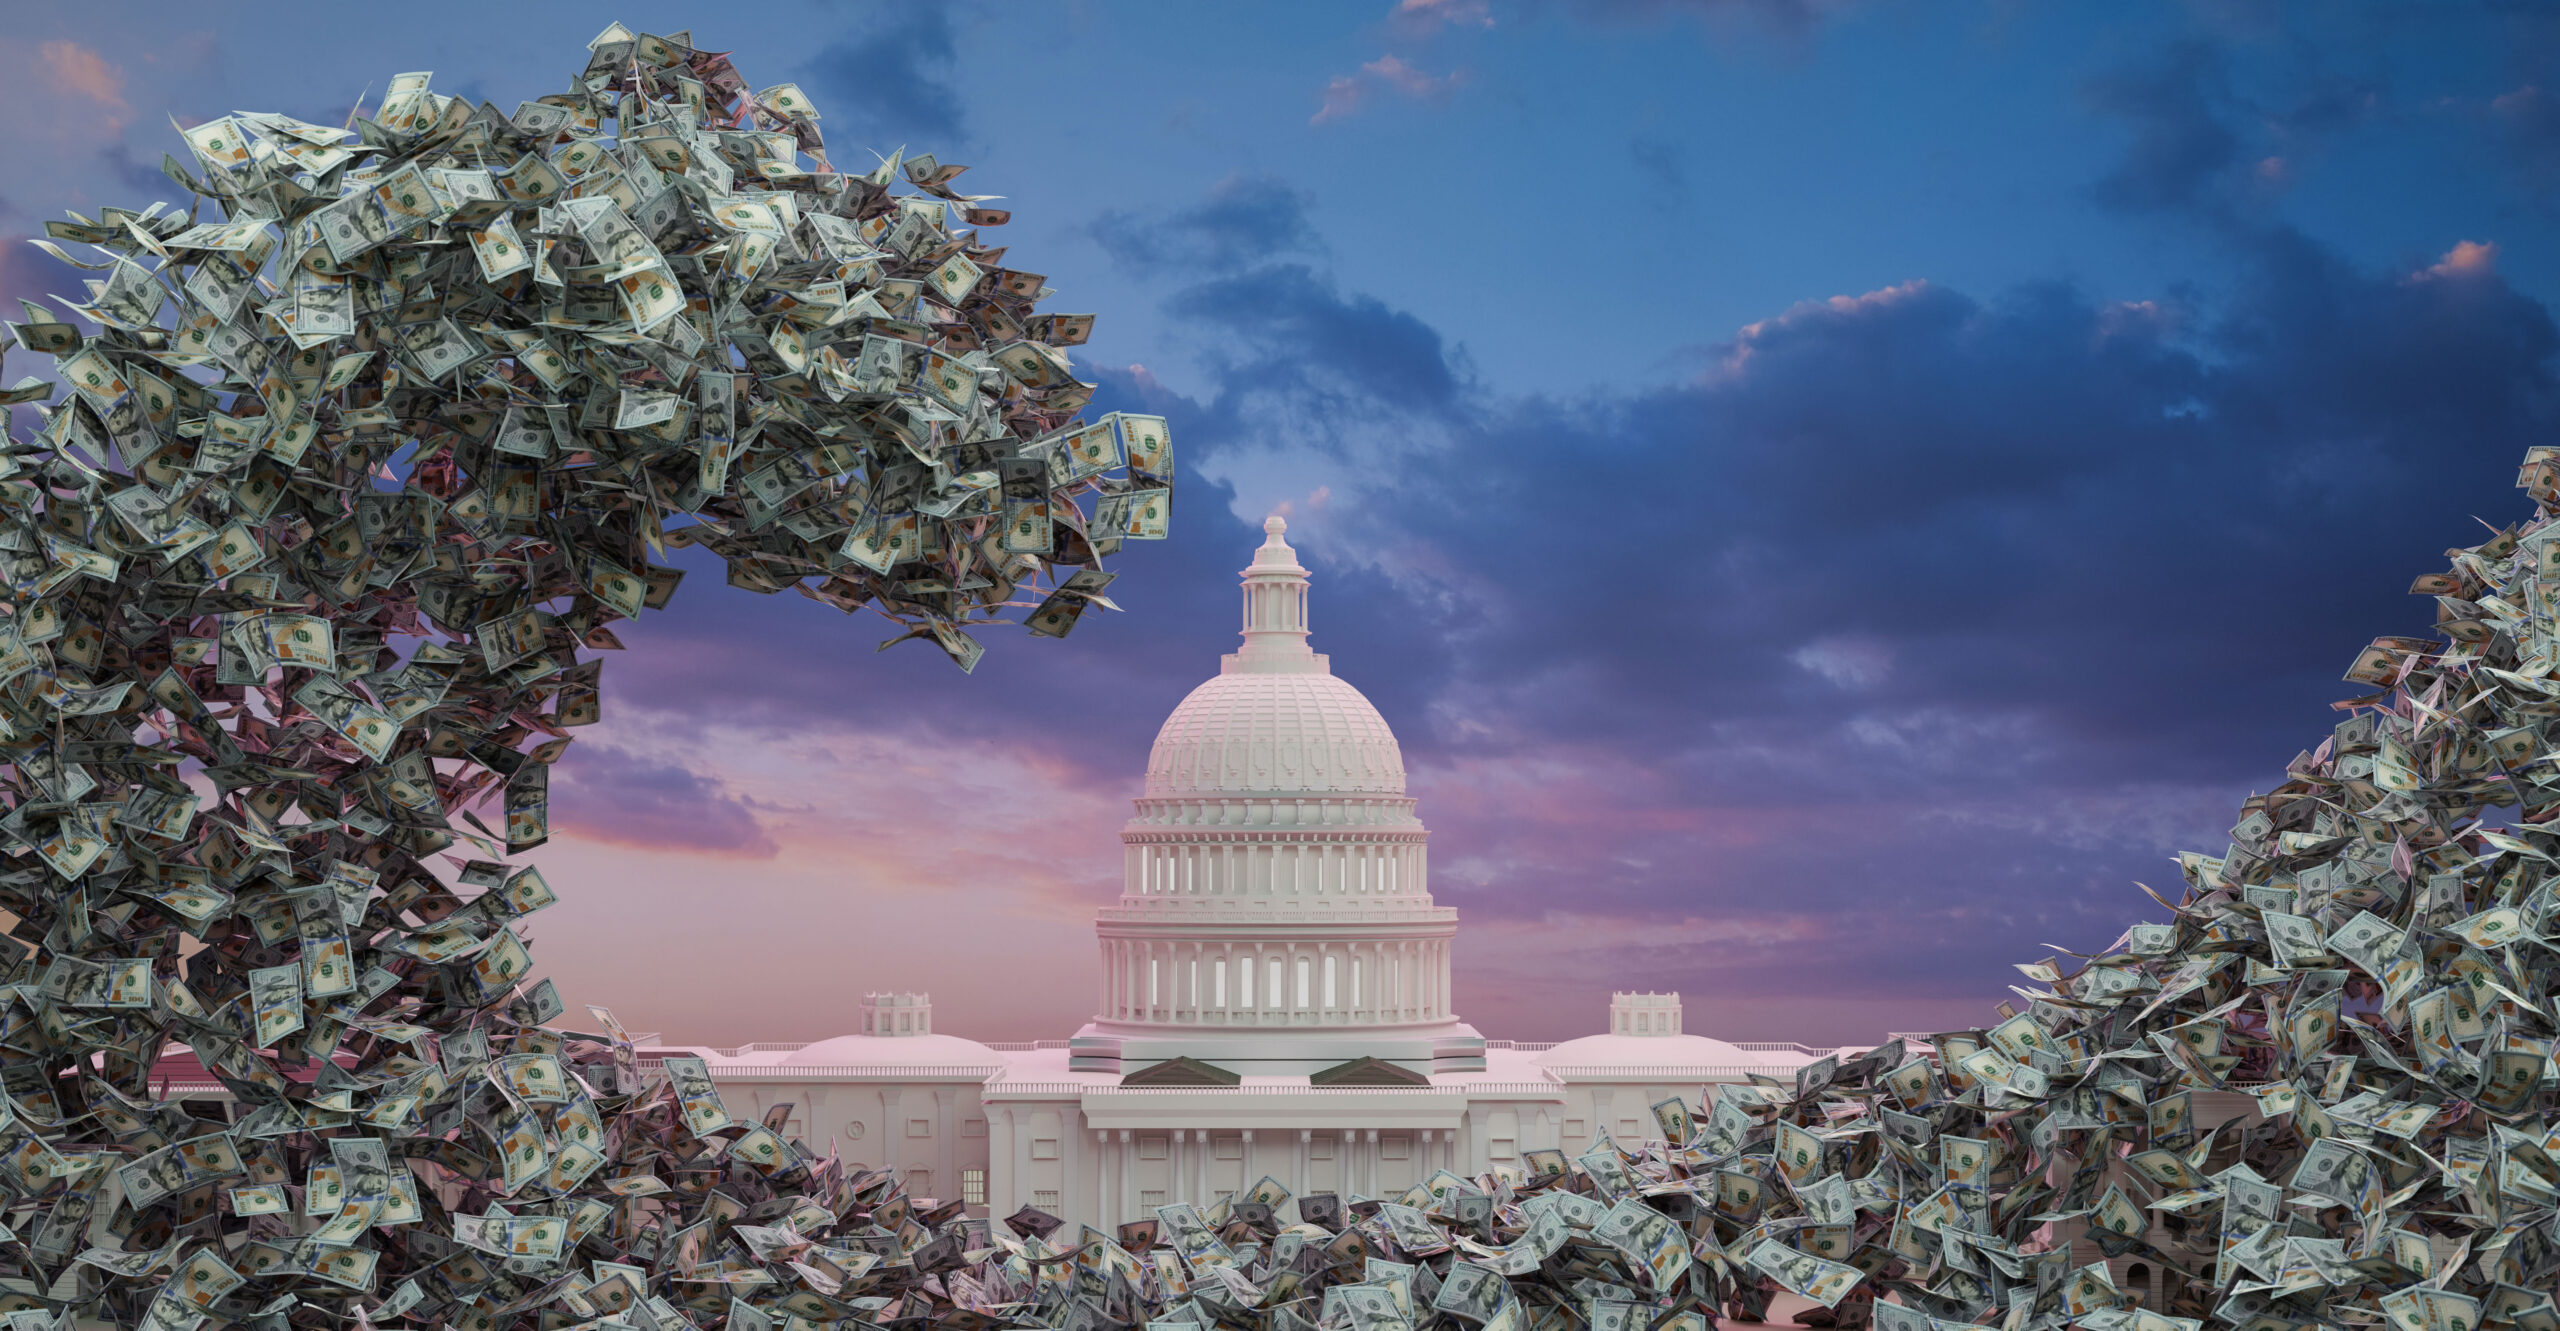 4 Ways Washington's Spending Spree Caused Inflation With Trillions in Waste, Fraud